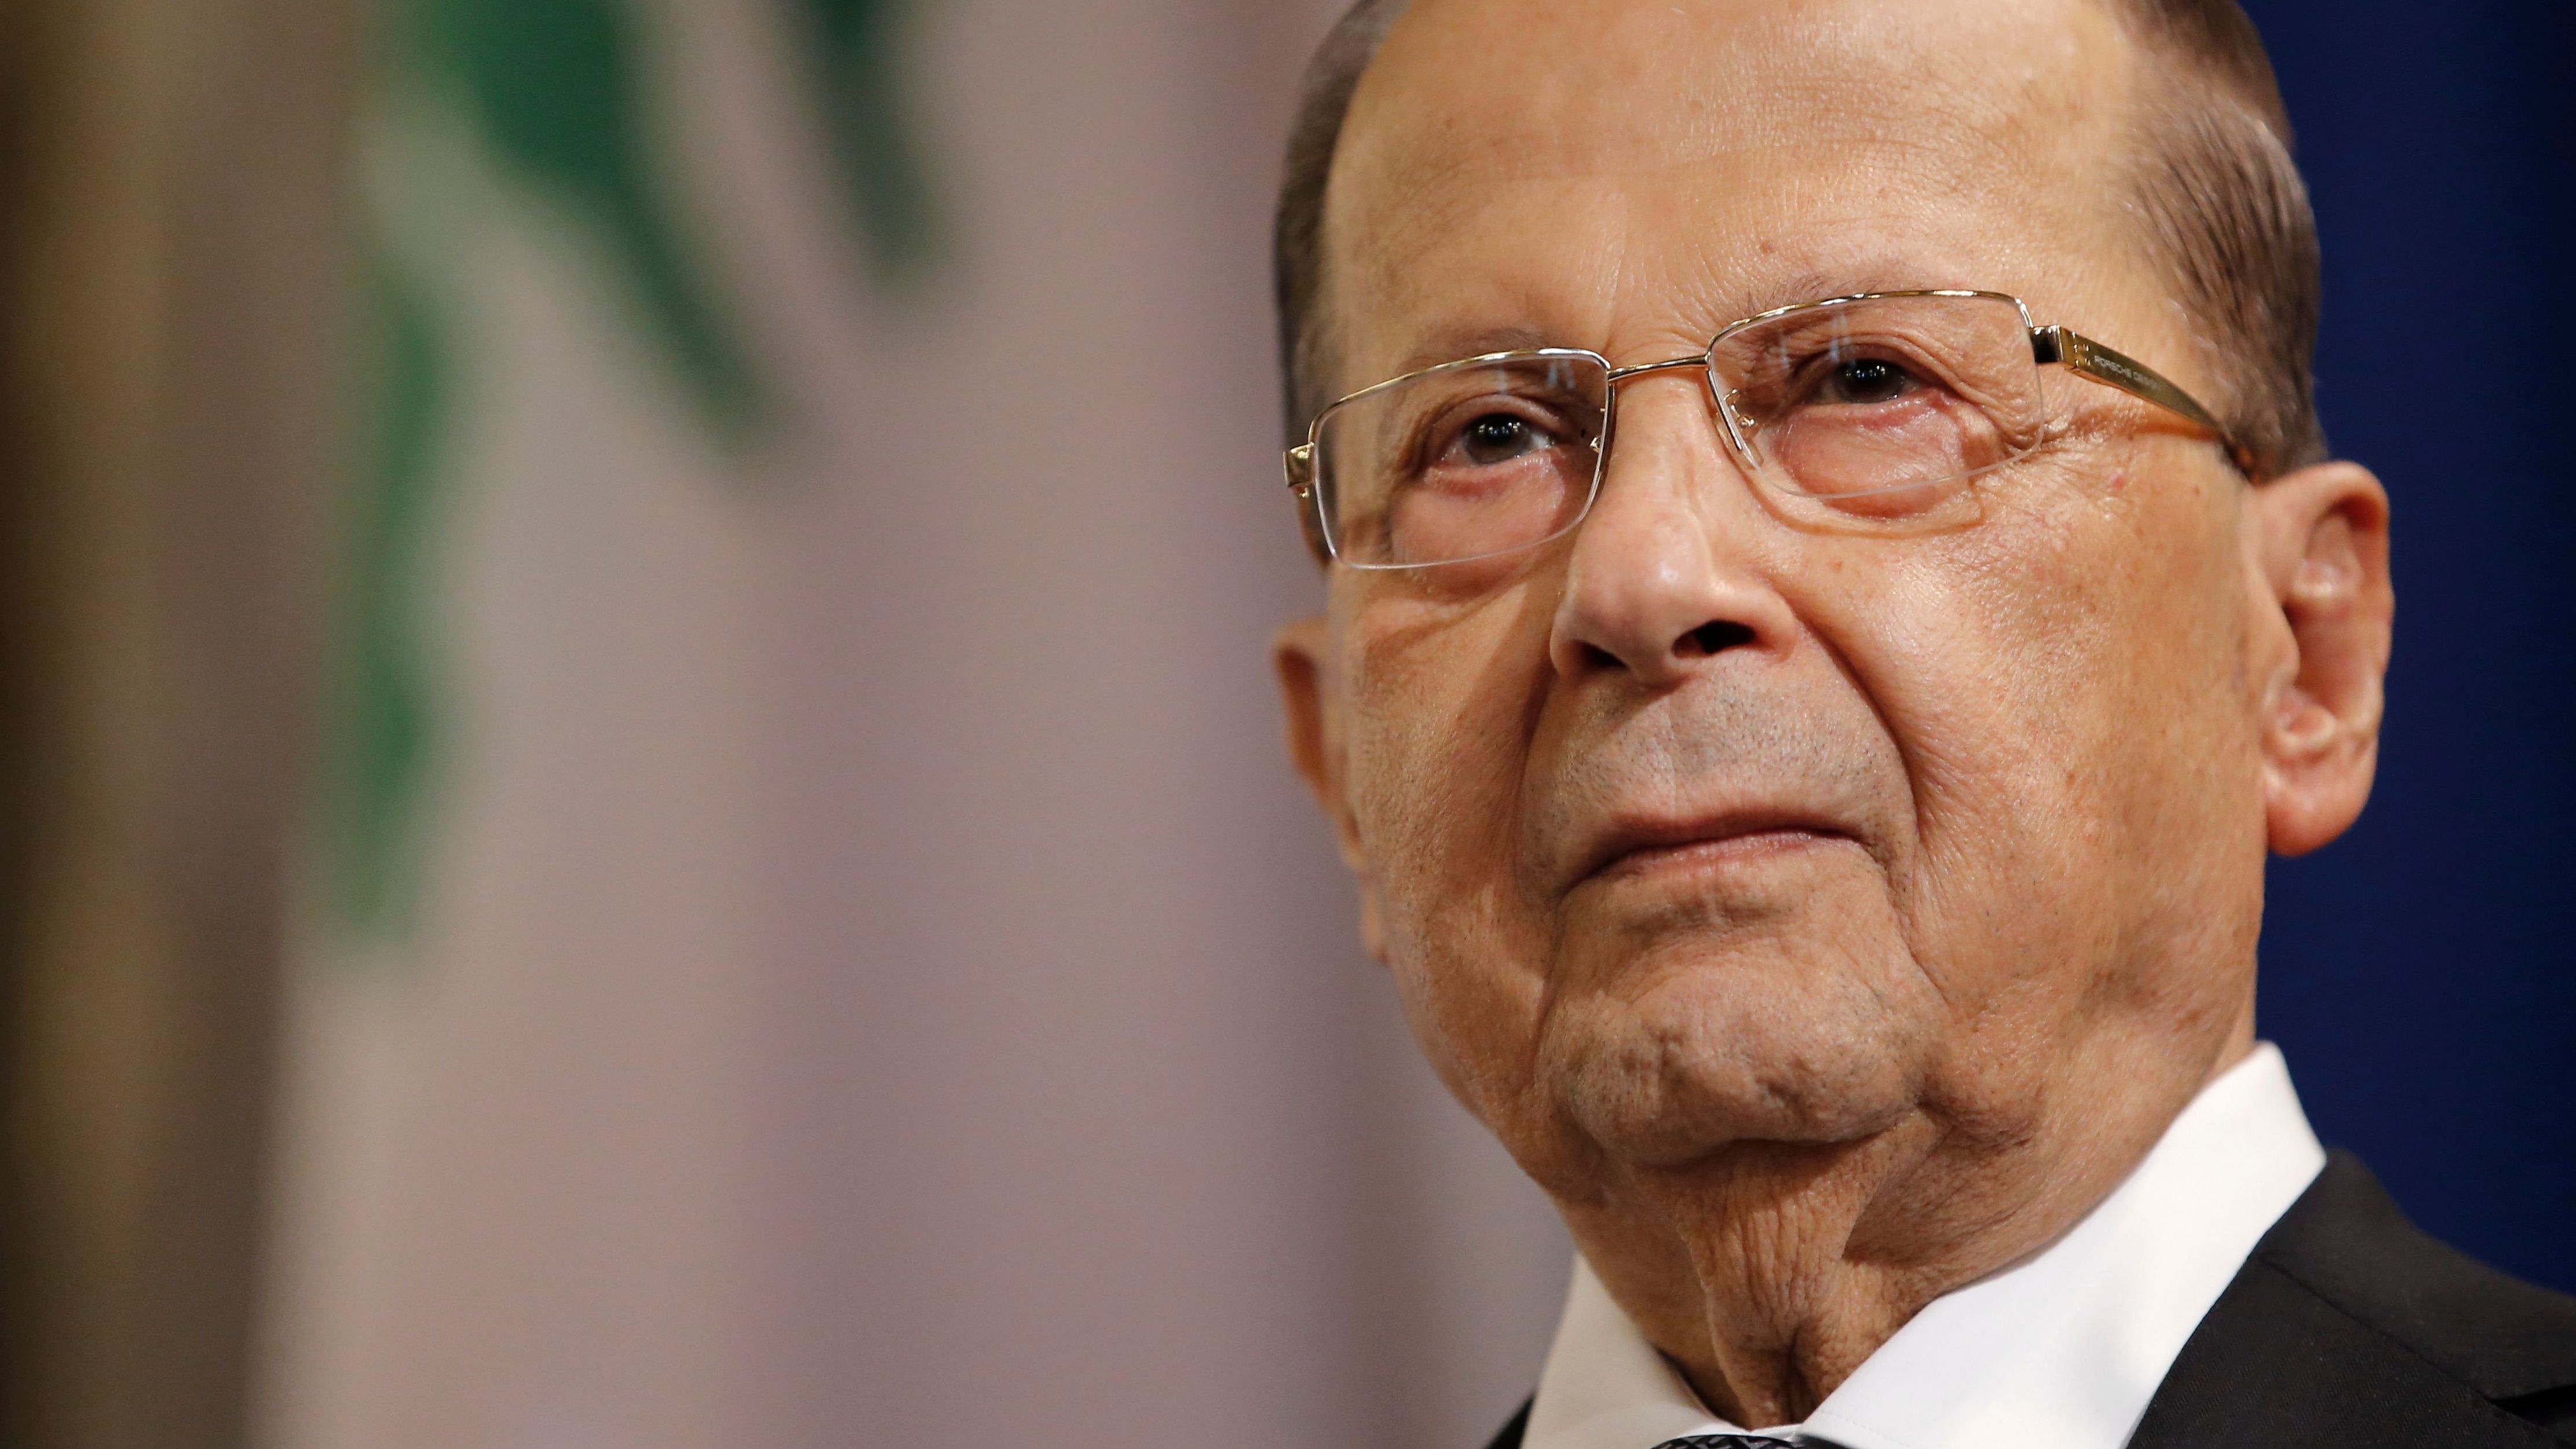 Michel Aoun came to power in 2016, but he said his departure on Sunday, one day before his term officially ends, was not the end of his political career.